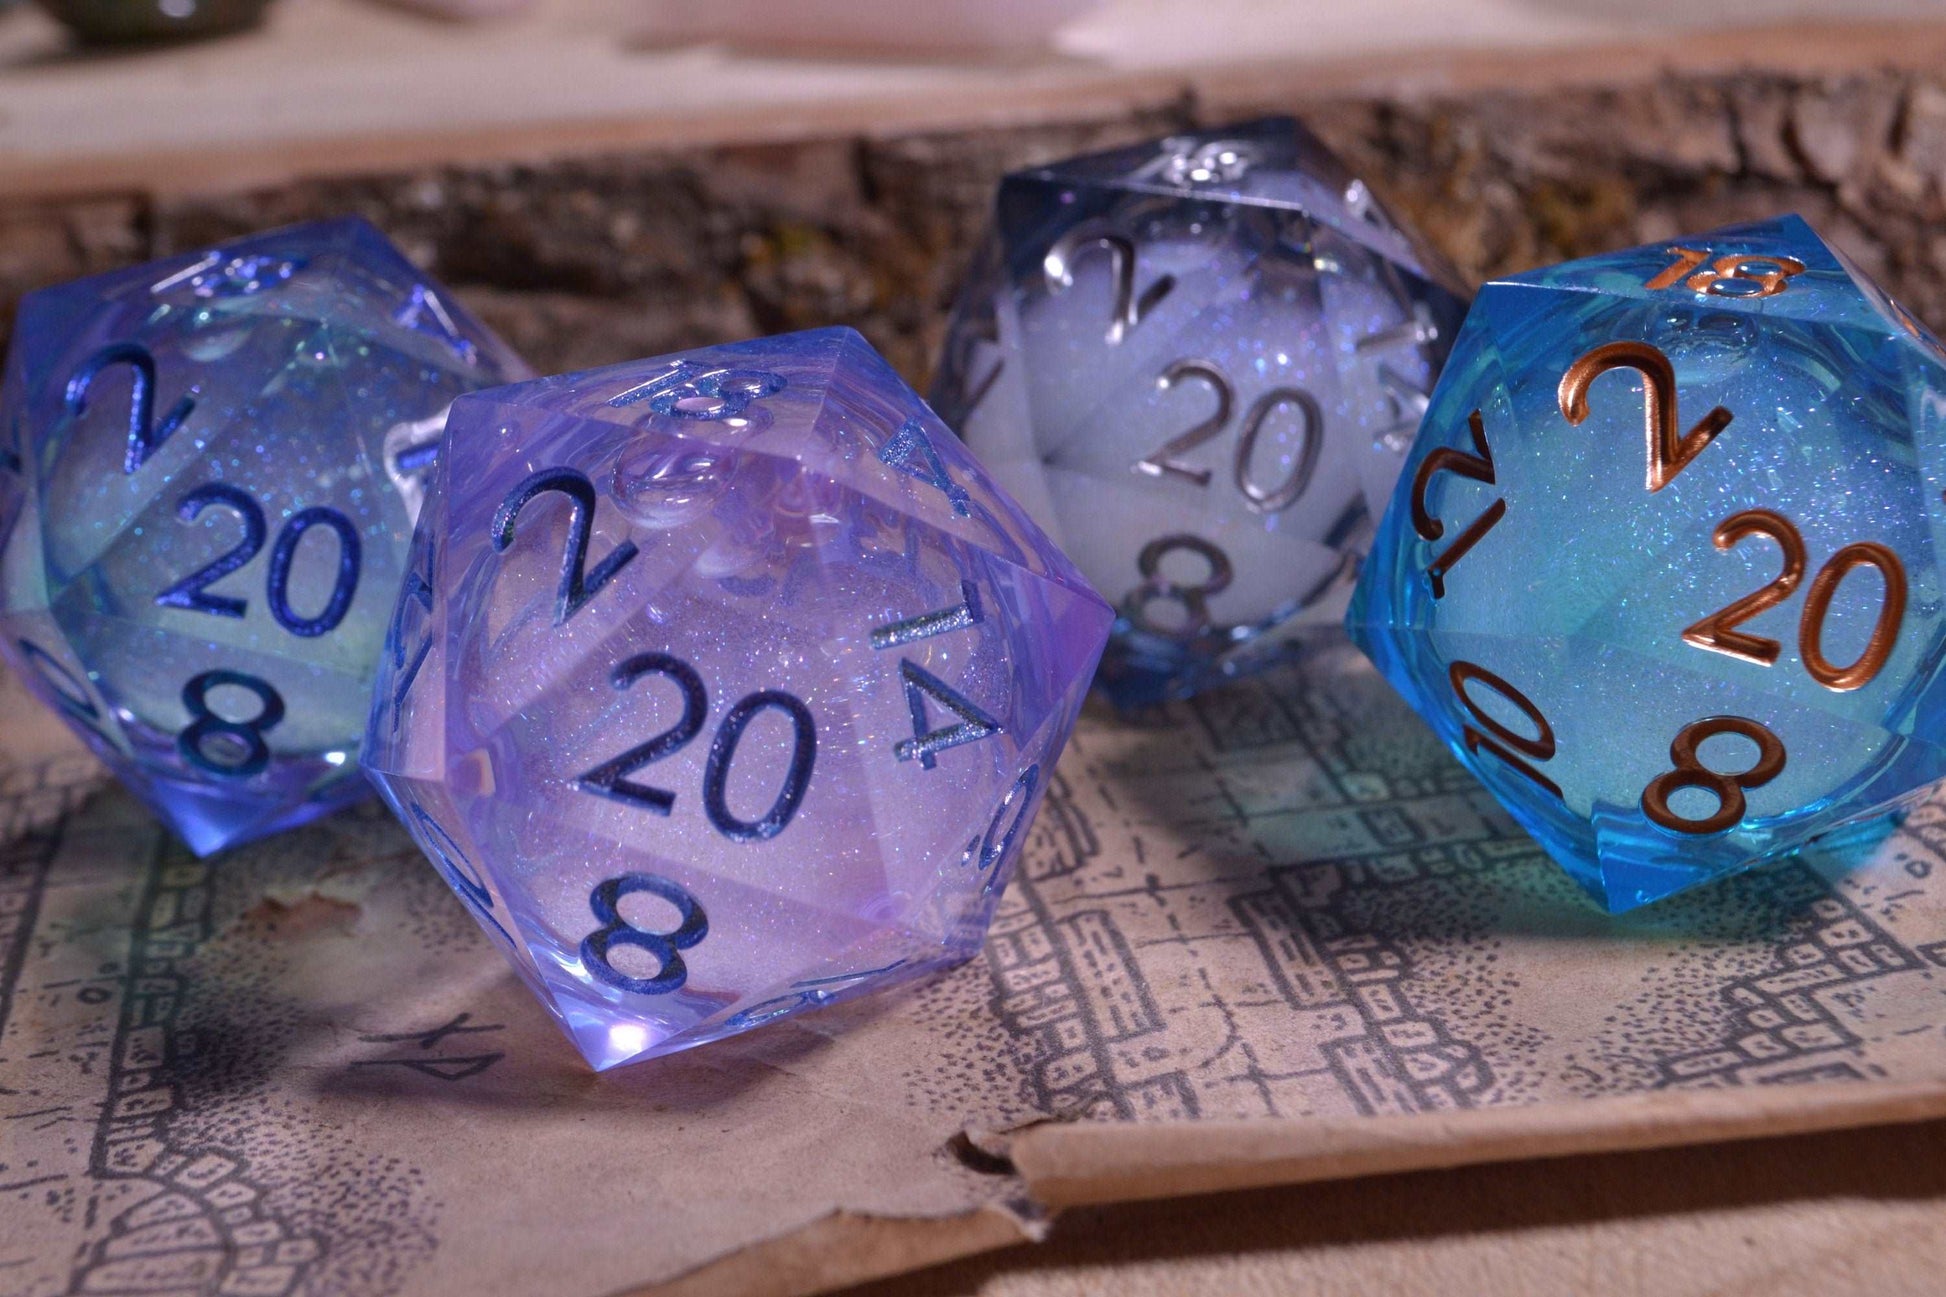 Large Chonk Liquid Core D20 DnD Dice With Metallic Numbering - Big D20 - Sharp Edge Resin -  For Dungeons and Dragons